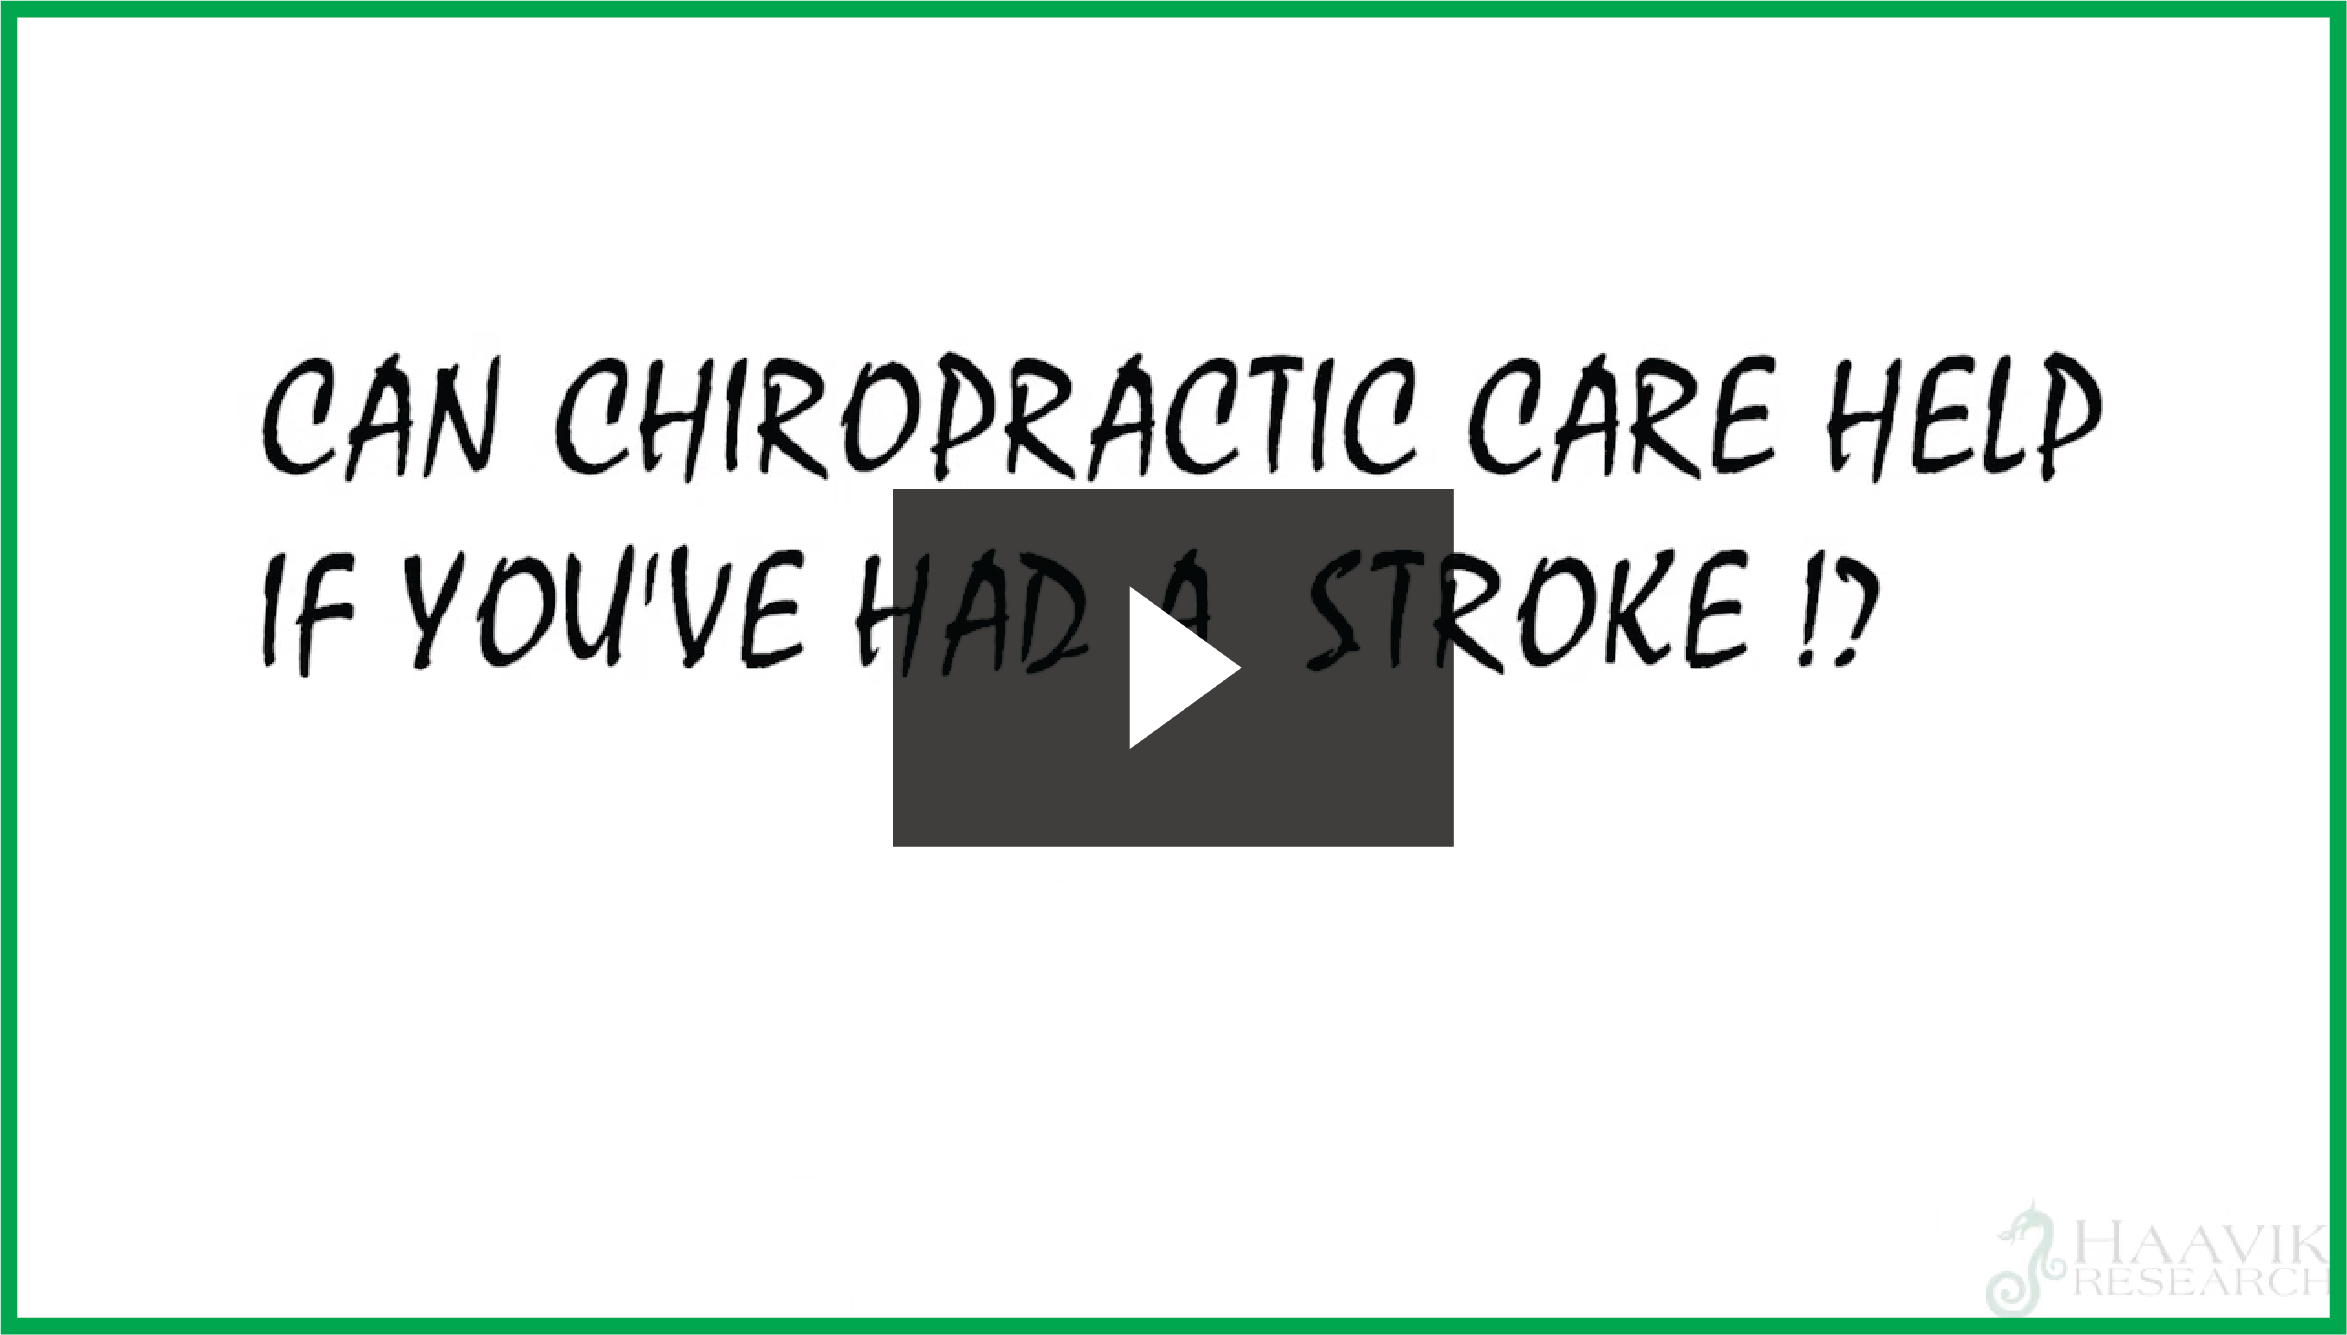 Can a Chiropractor help if you've had a stroke